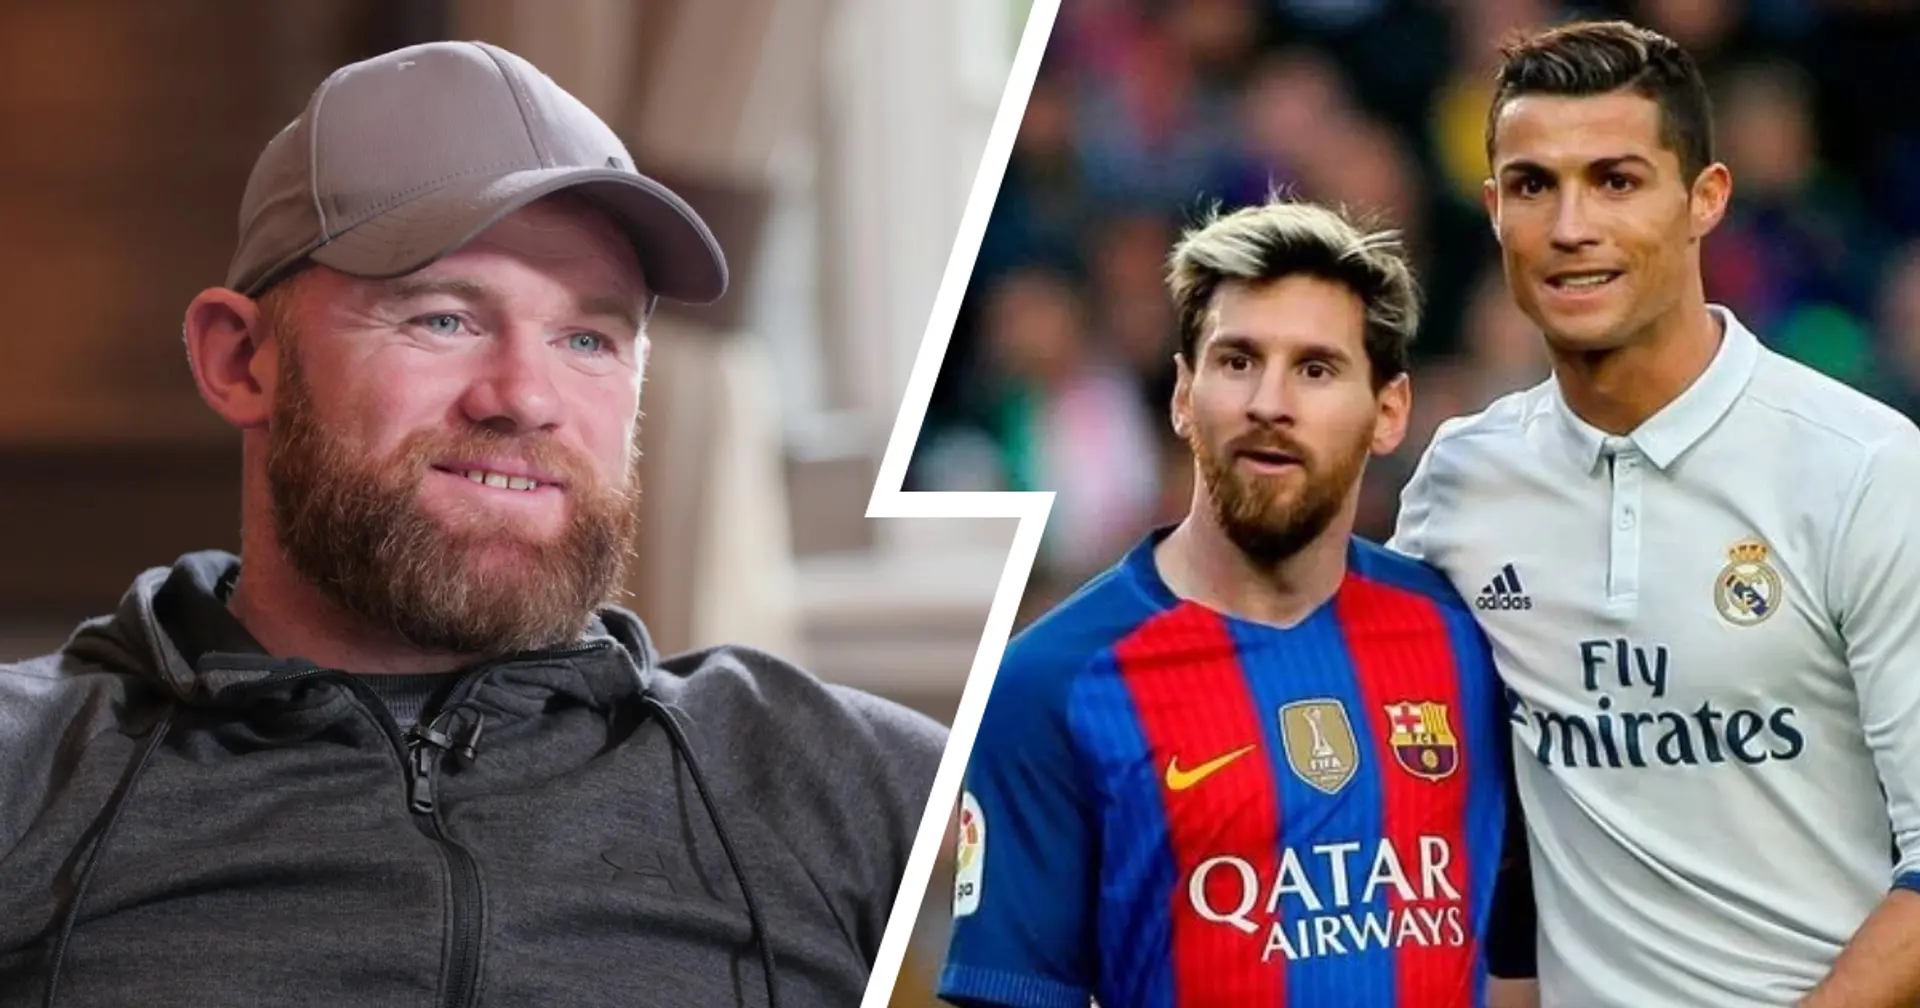 Wayne Rooney: 'I would love to see Messi or Ronaldo win the World Cup'